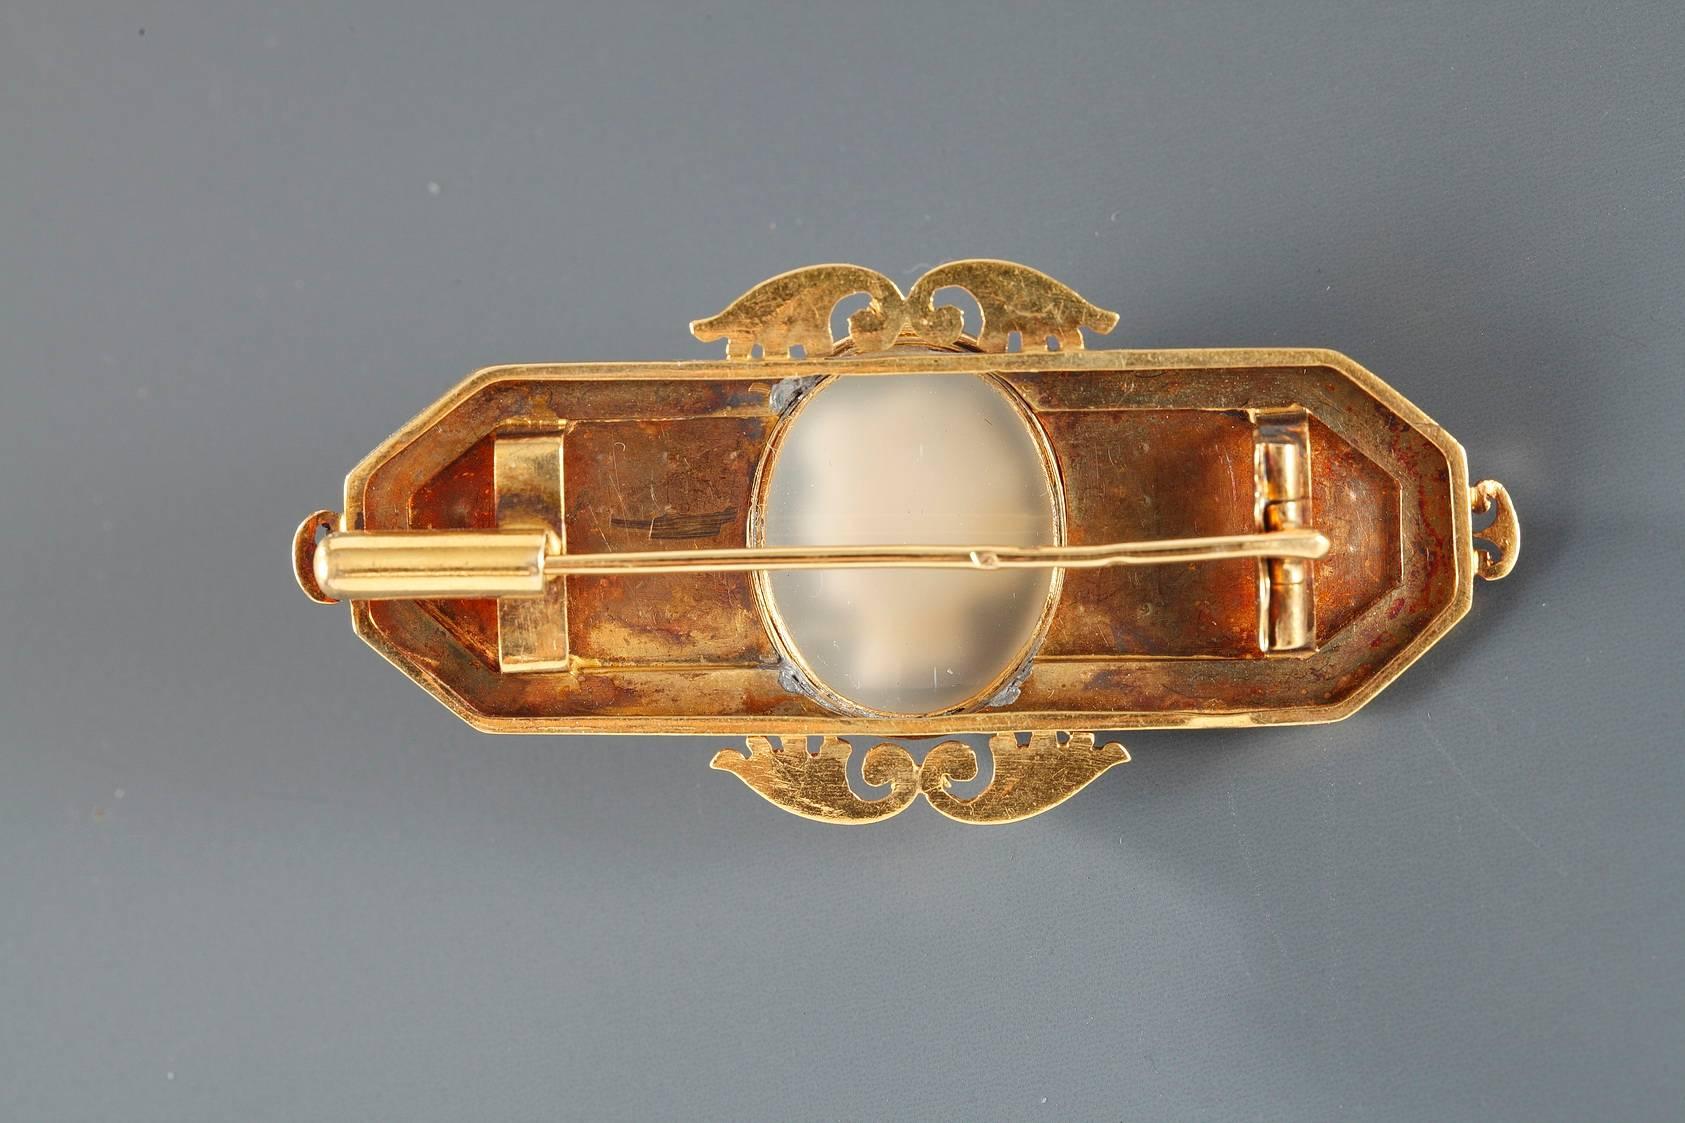 Gold brooch featuring a double-layered agate cameo of a woman. Openwork palmettes set off the top and the bottom of the cameo, which is set on a gold, rectangular background. The background is delicately sculpted with flowers separated by rounded